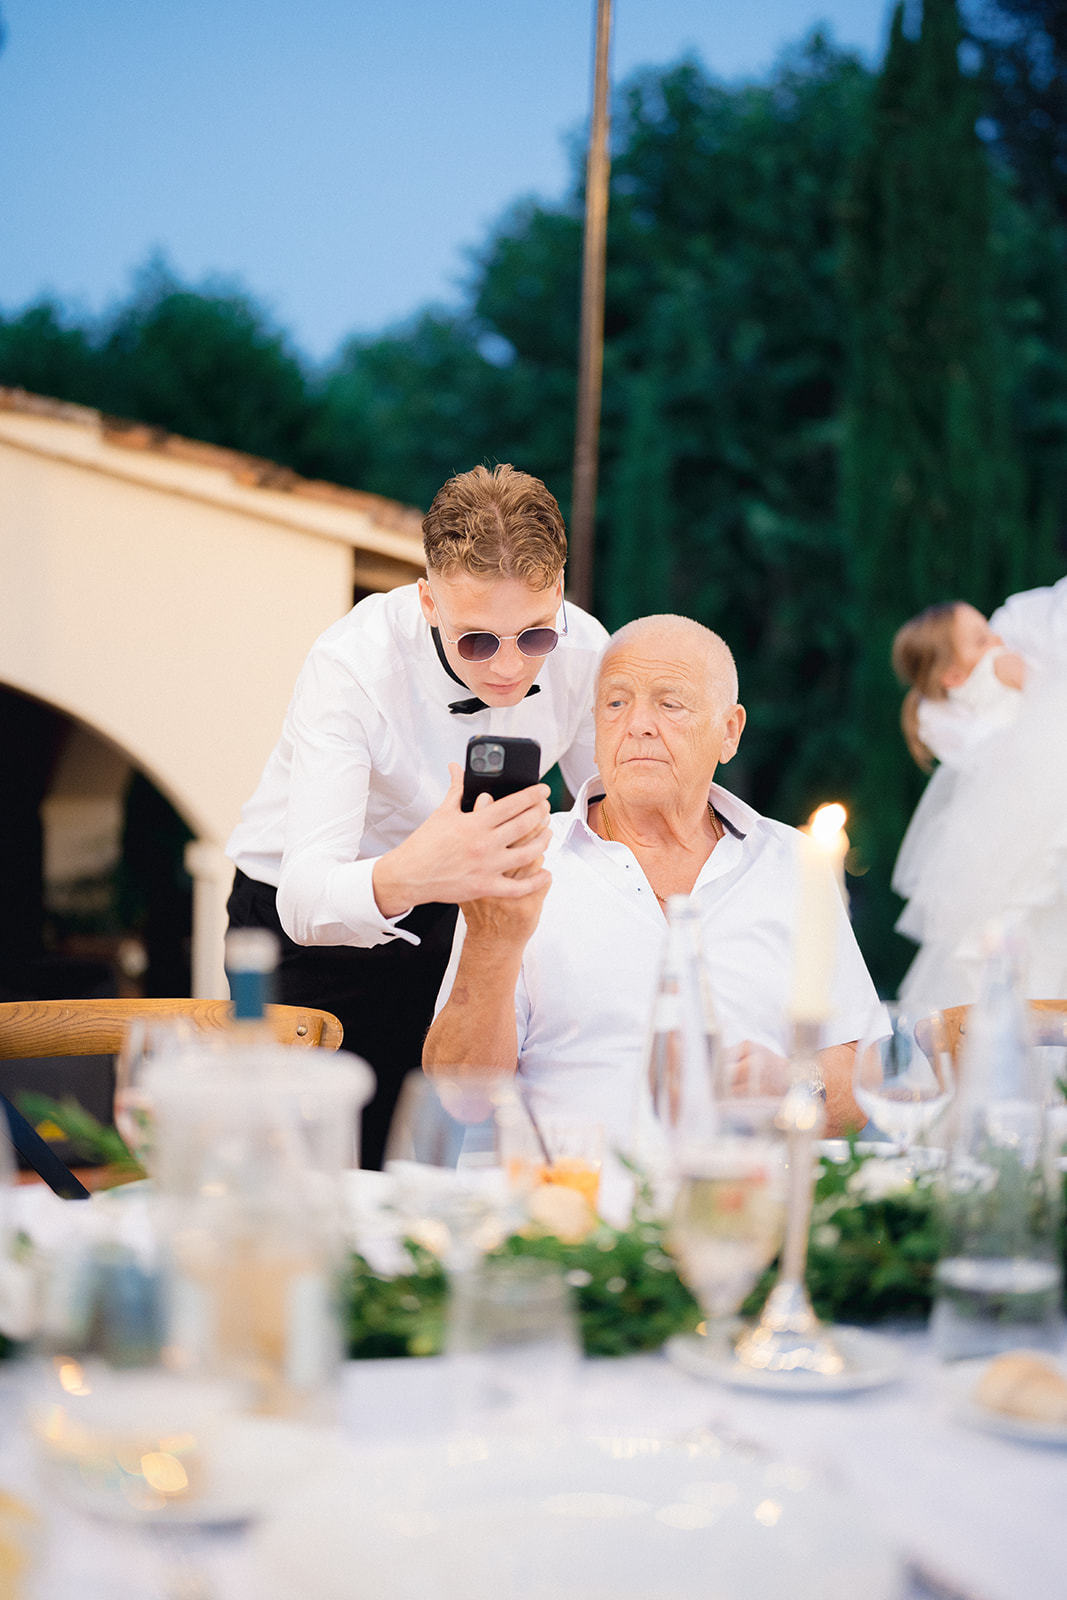 The groom joking around with his grandfather